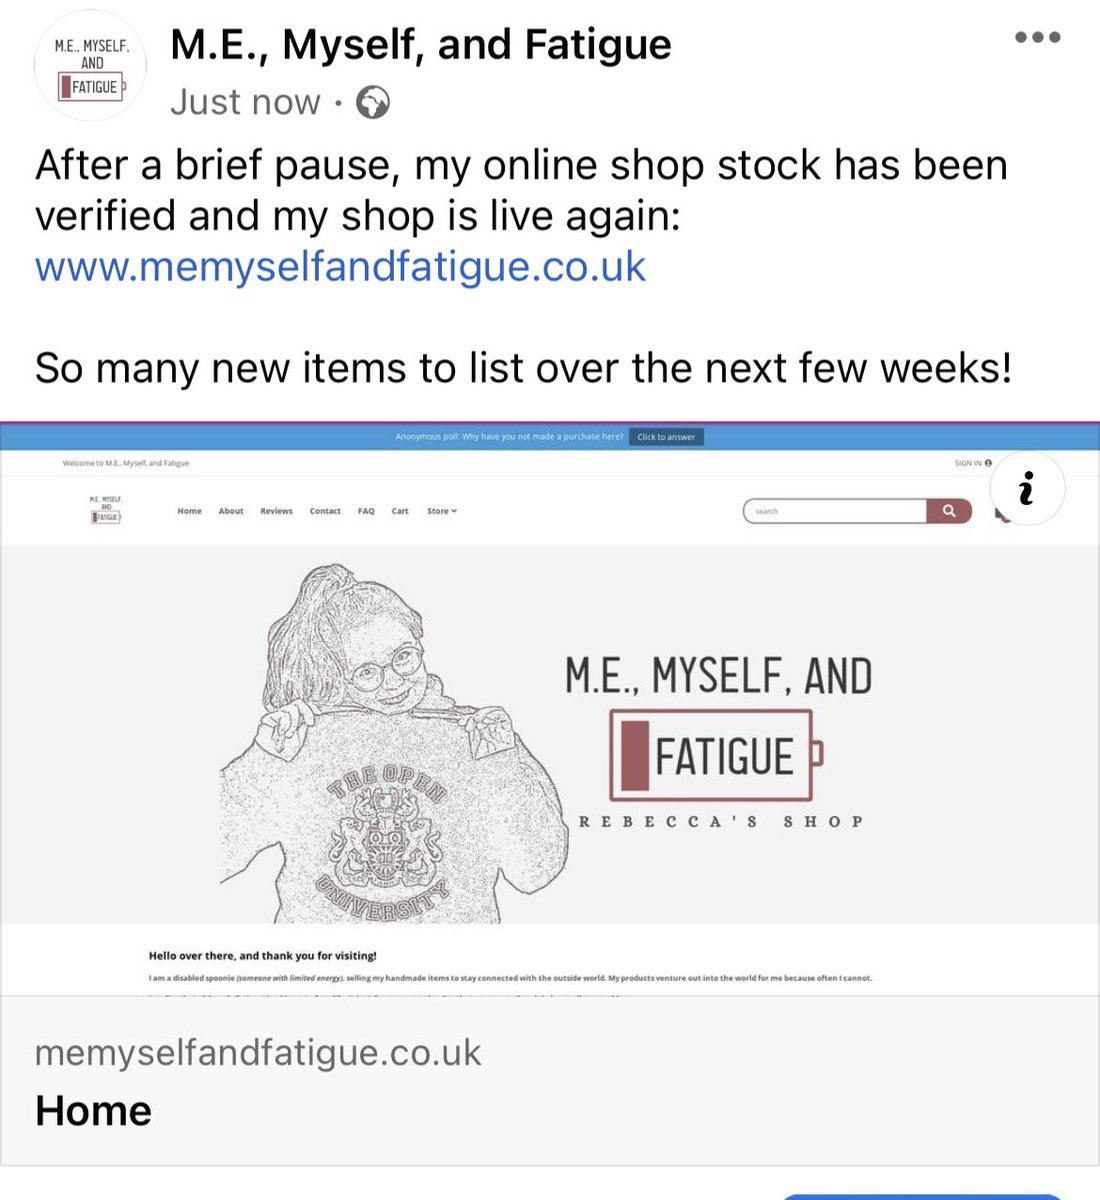 After a brief pause, my online shop stock has been verified and my shop is live again:
memyselfandfatigue.co.uk

So many new items to list over the next few weeks!

#smallbusiness #SmallBizFridayUK #FridayFeeling #OnSaleNow